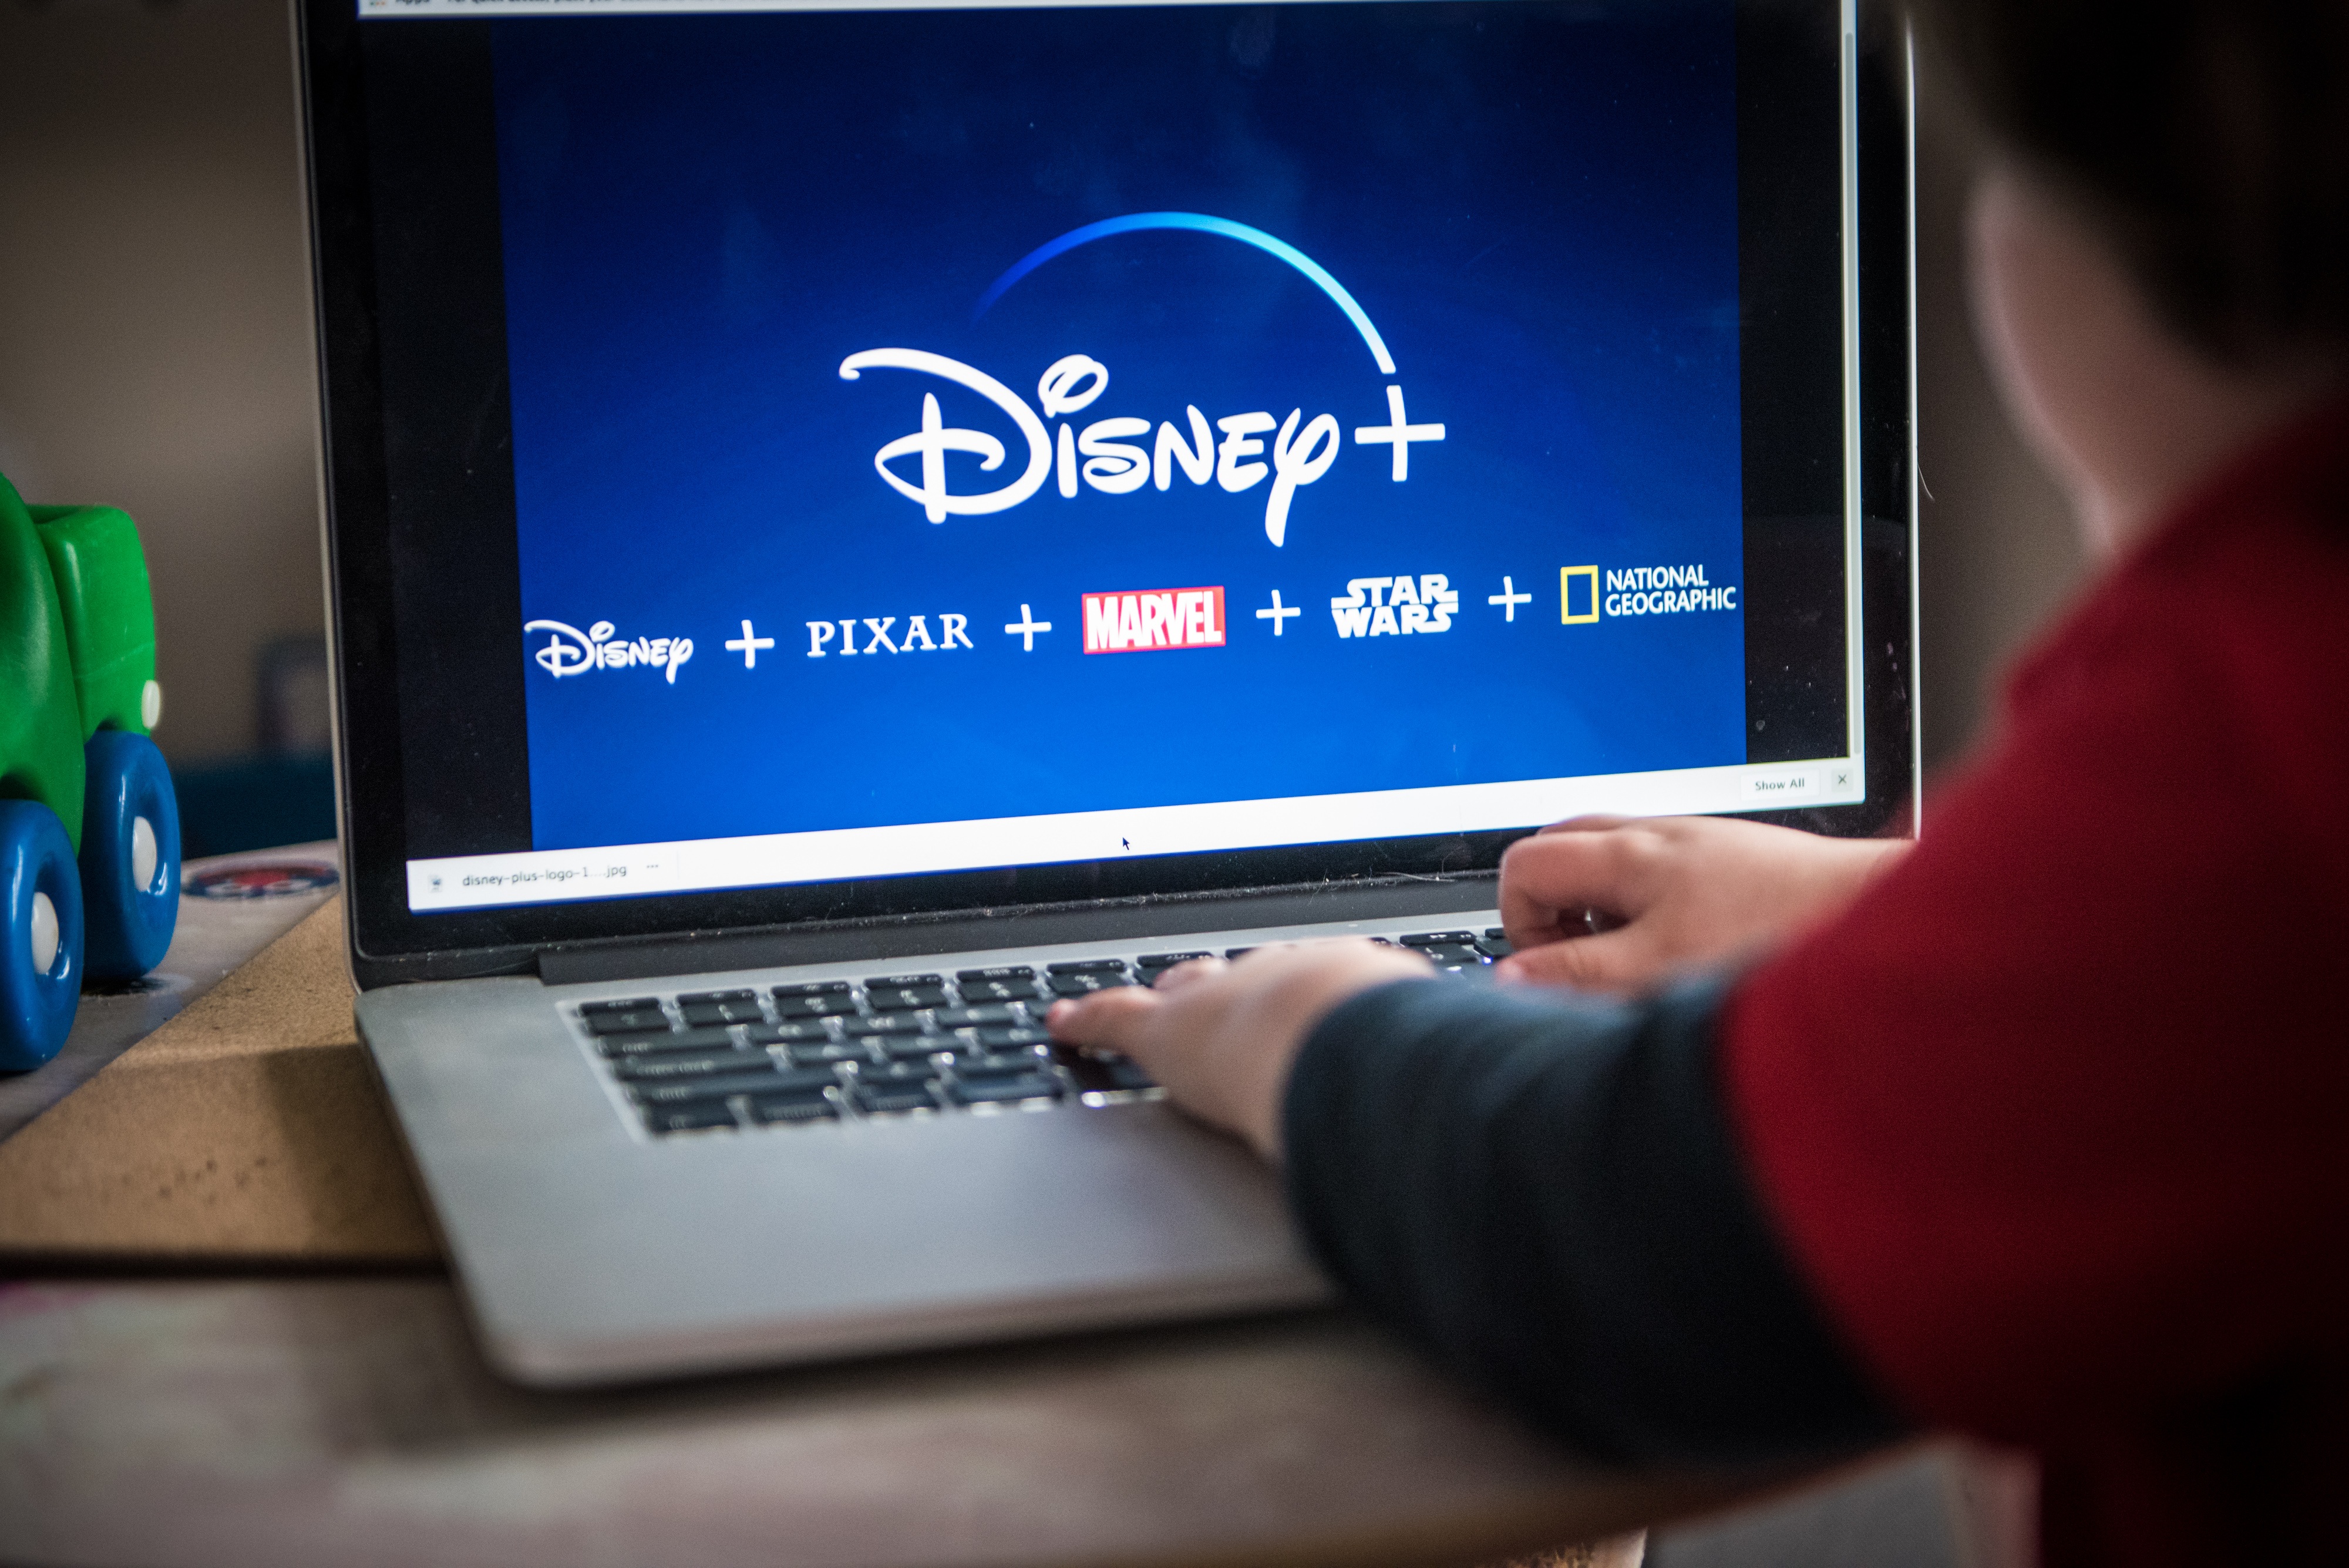 How to Get Disney+, Paramount+, Netflix, Hulu, & More Free From Services You Already Pay For